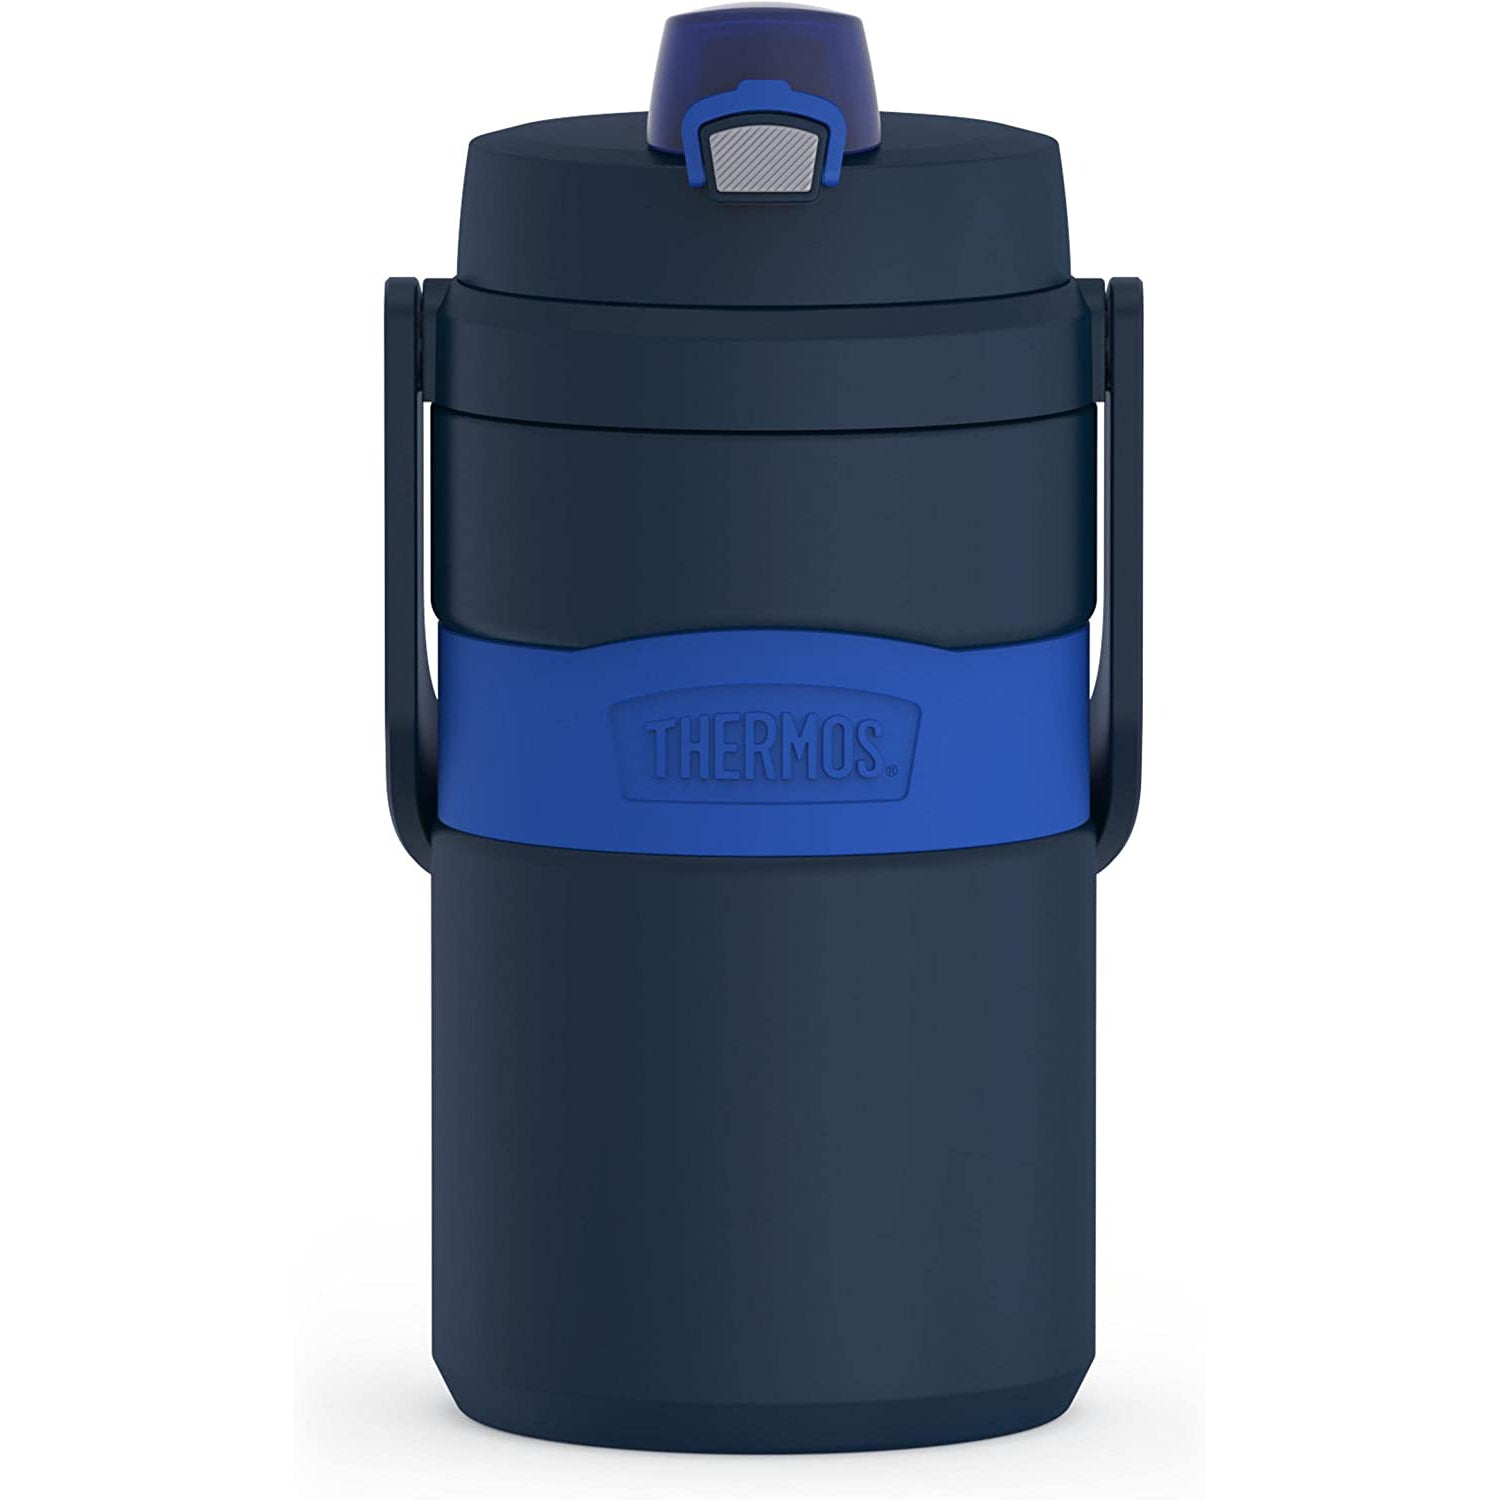 THERMOS 64 Ounce Foam Insulated Water Jug, Navy